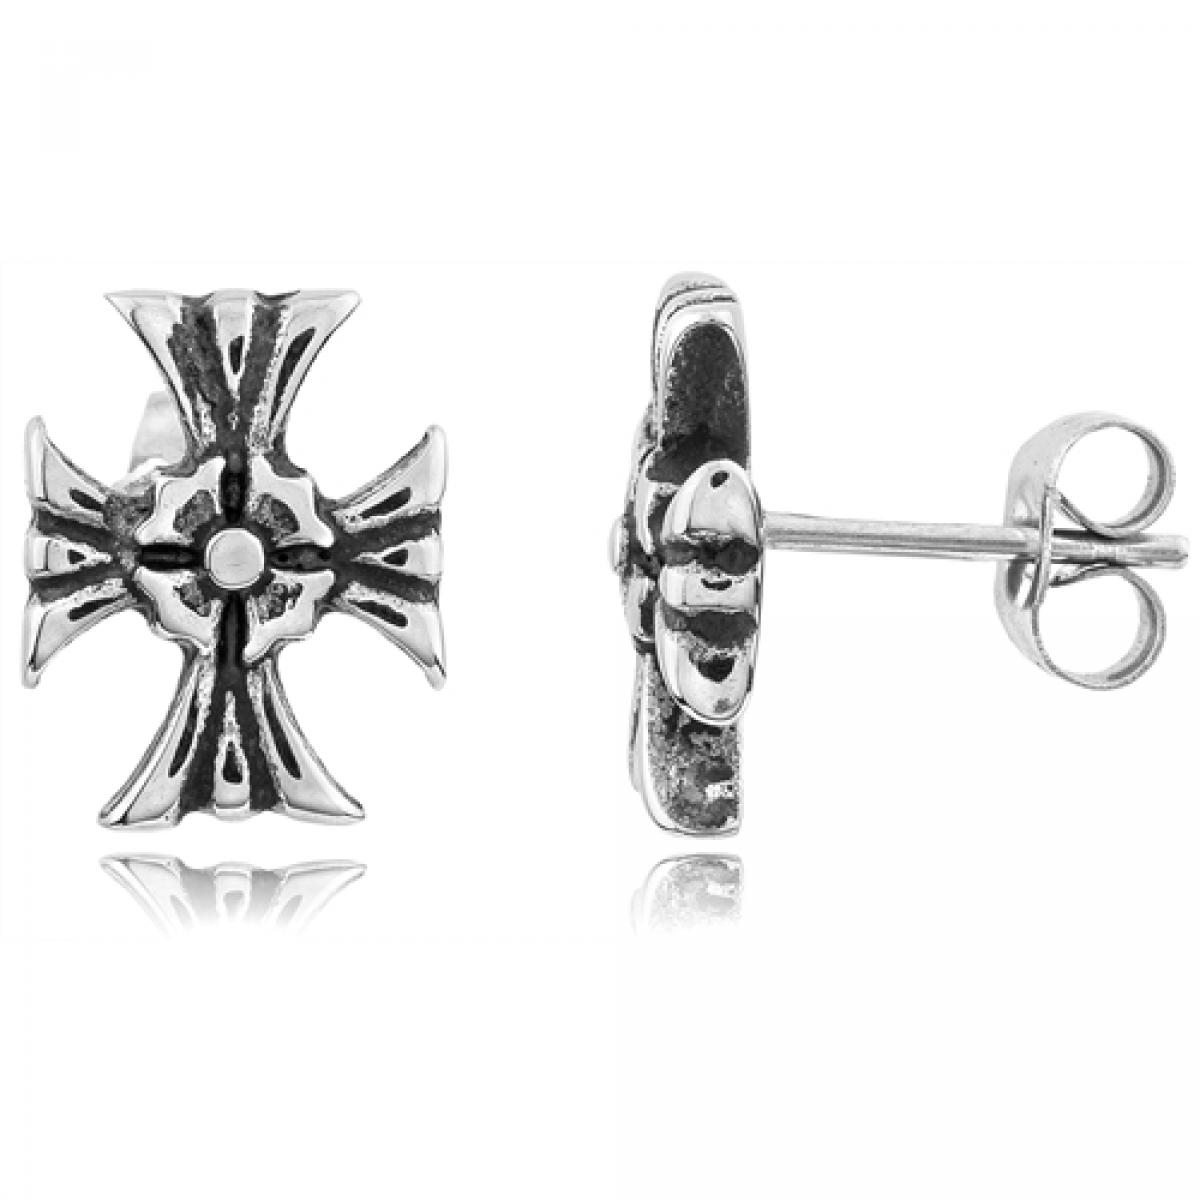 Picture of MDR Trading SS-SSS005 10 mm Stainless Steel Black & Silver Studs Cross Earrings